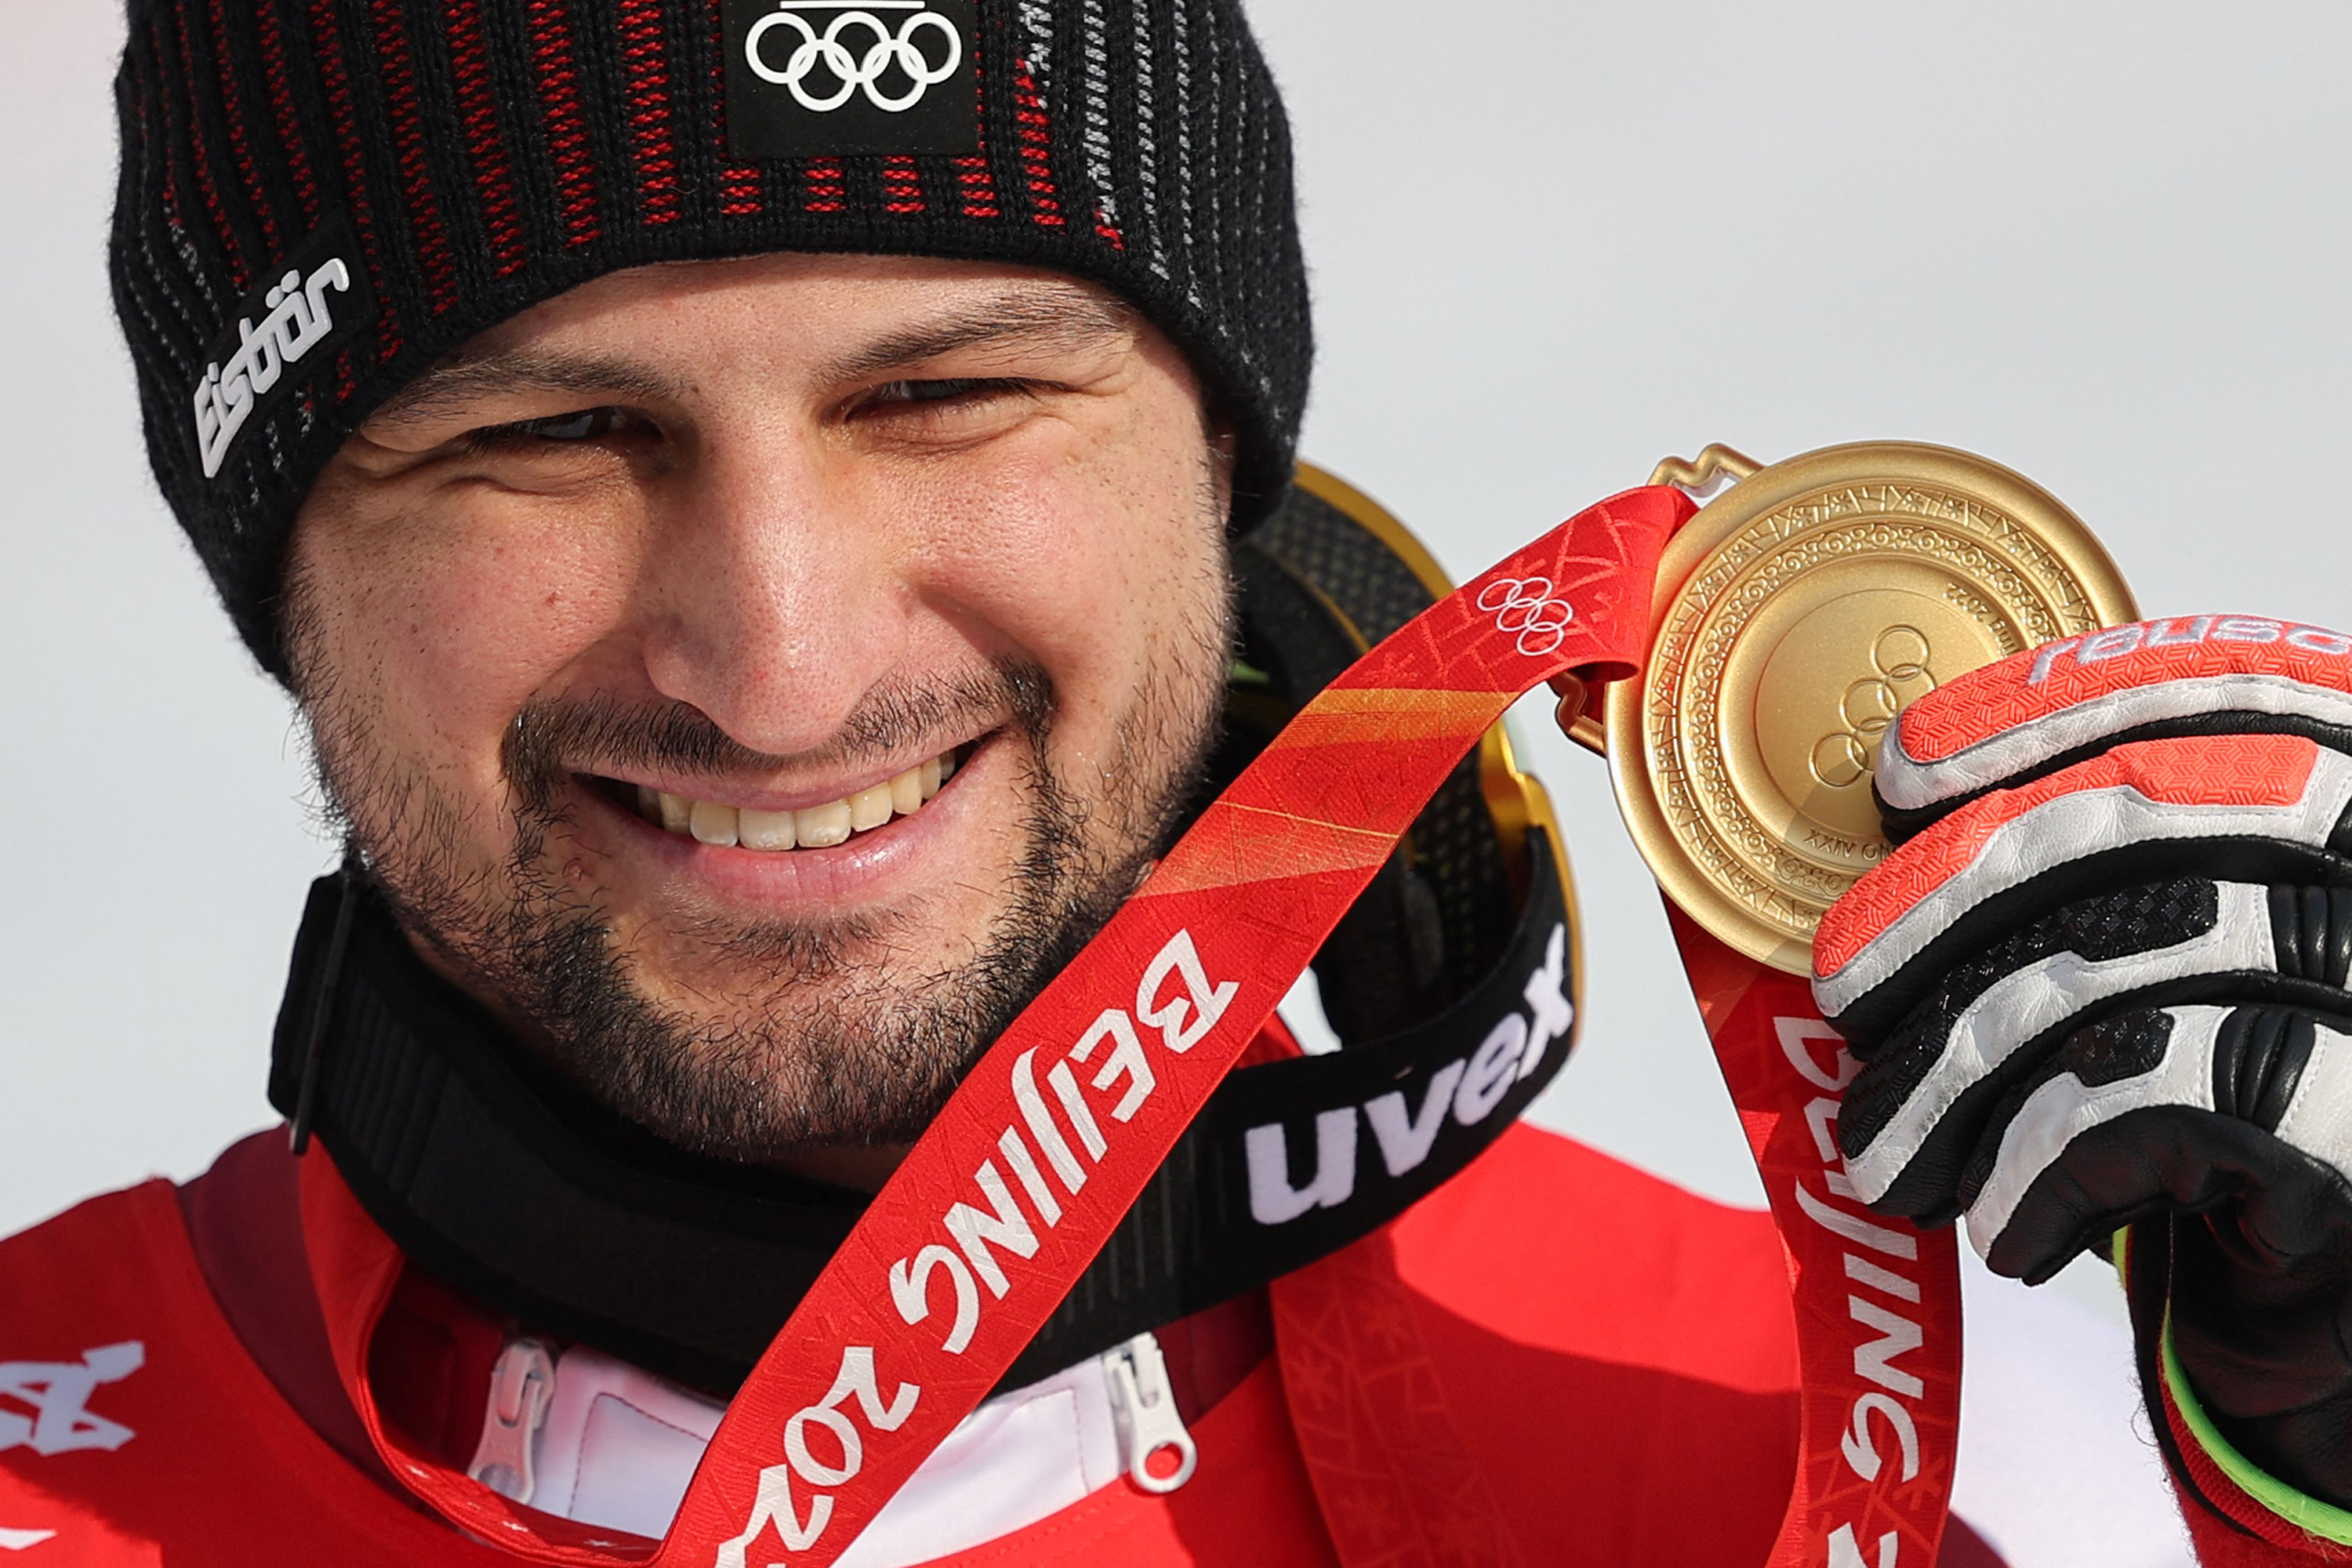 Johannes Strolz shows off his gold medal on Thursday.